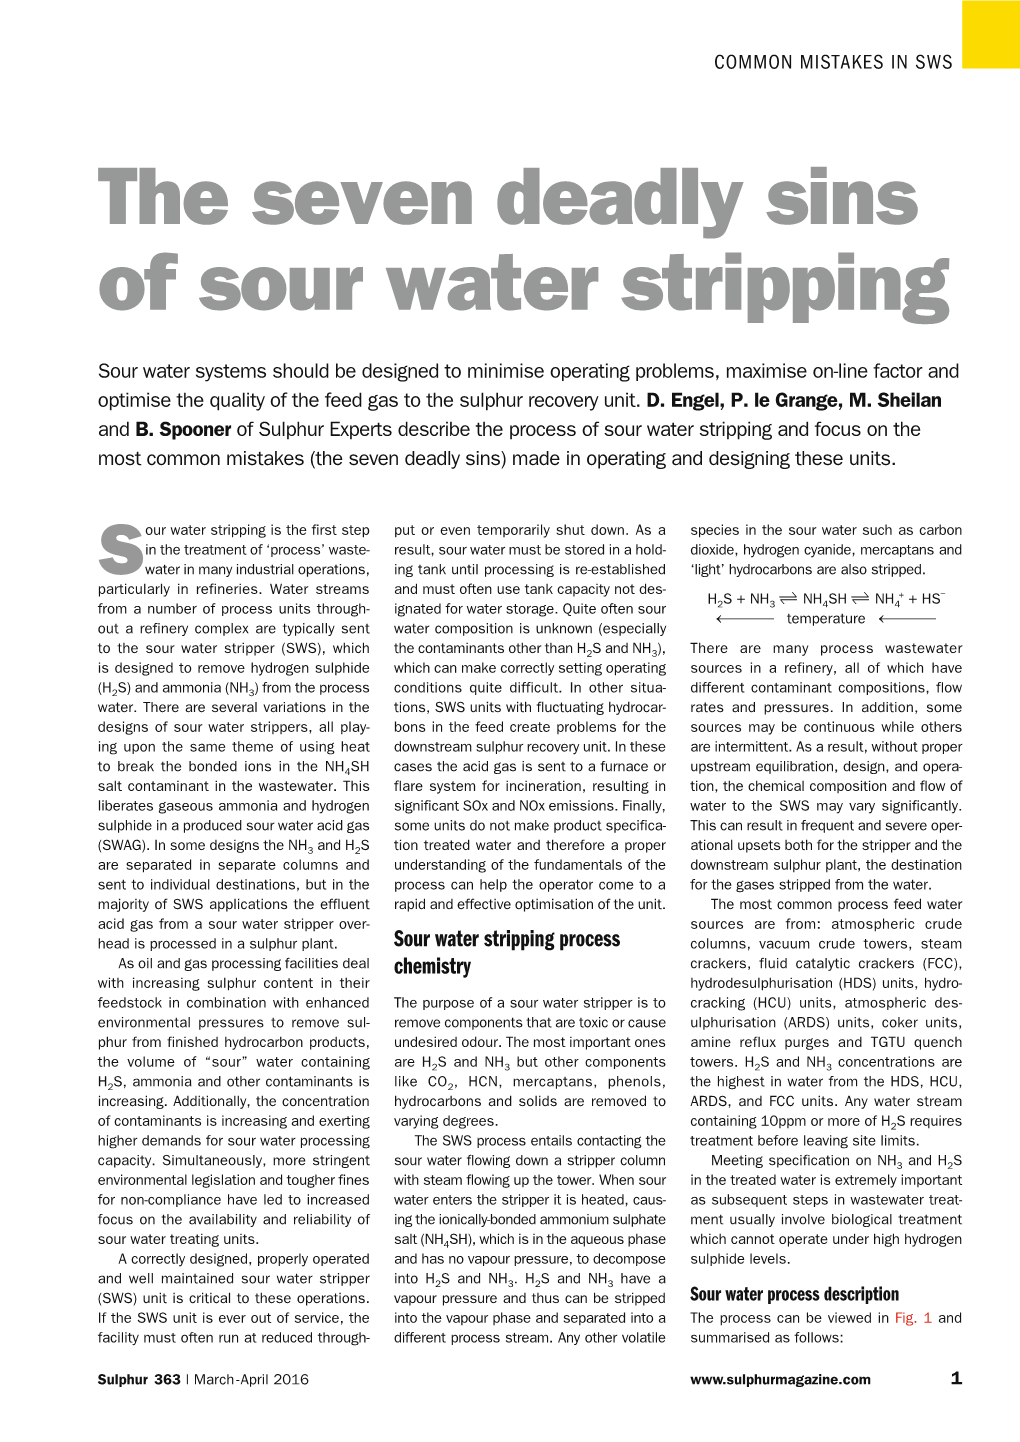 The Seven Deadly Sins of Sour Water Stripping